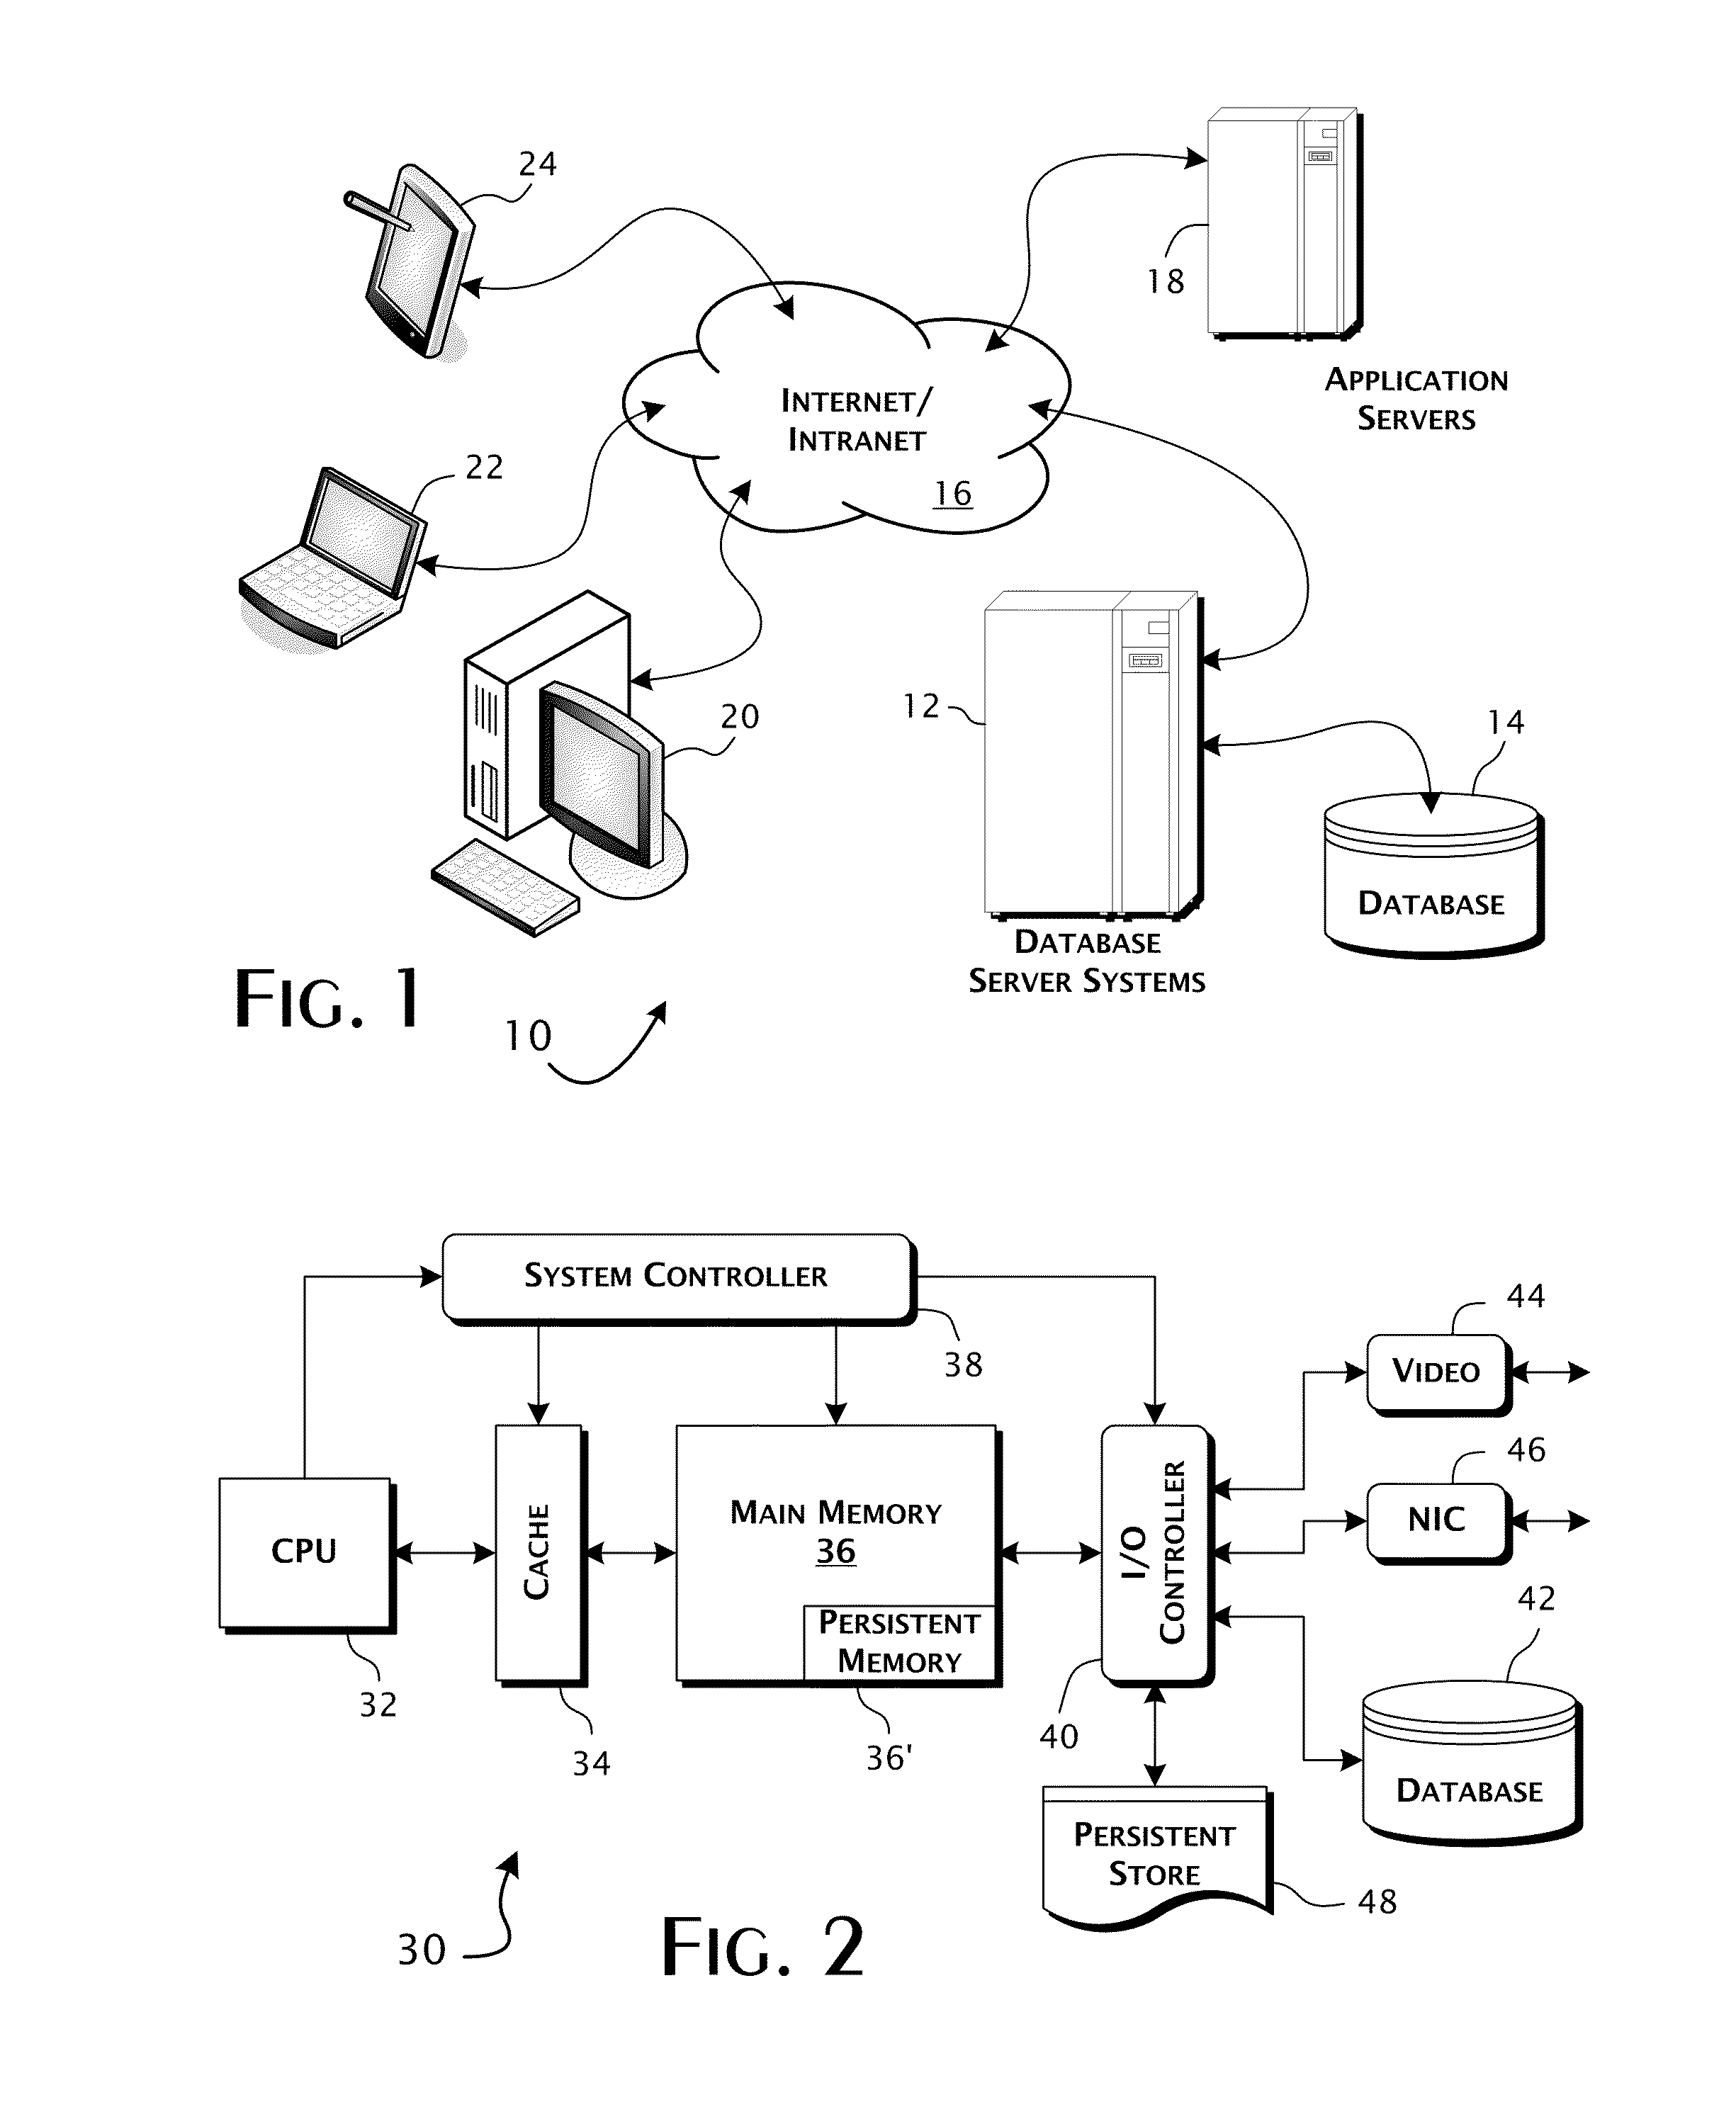 Column-store database architecture utilizing positional delta tree update system and methods